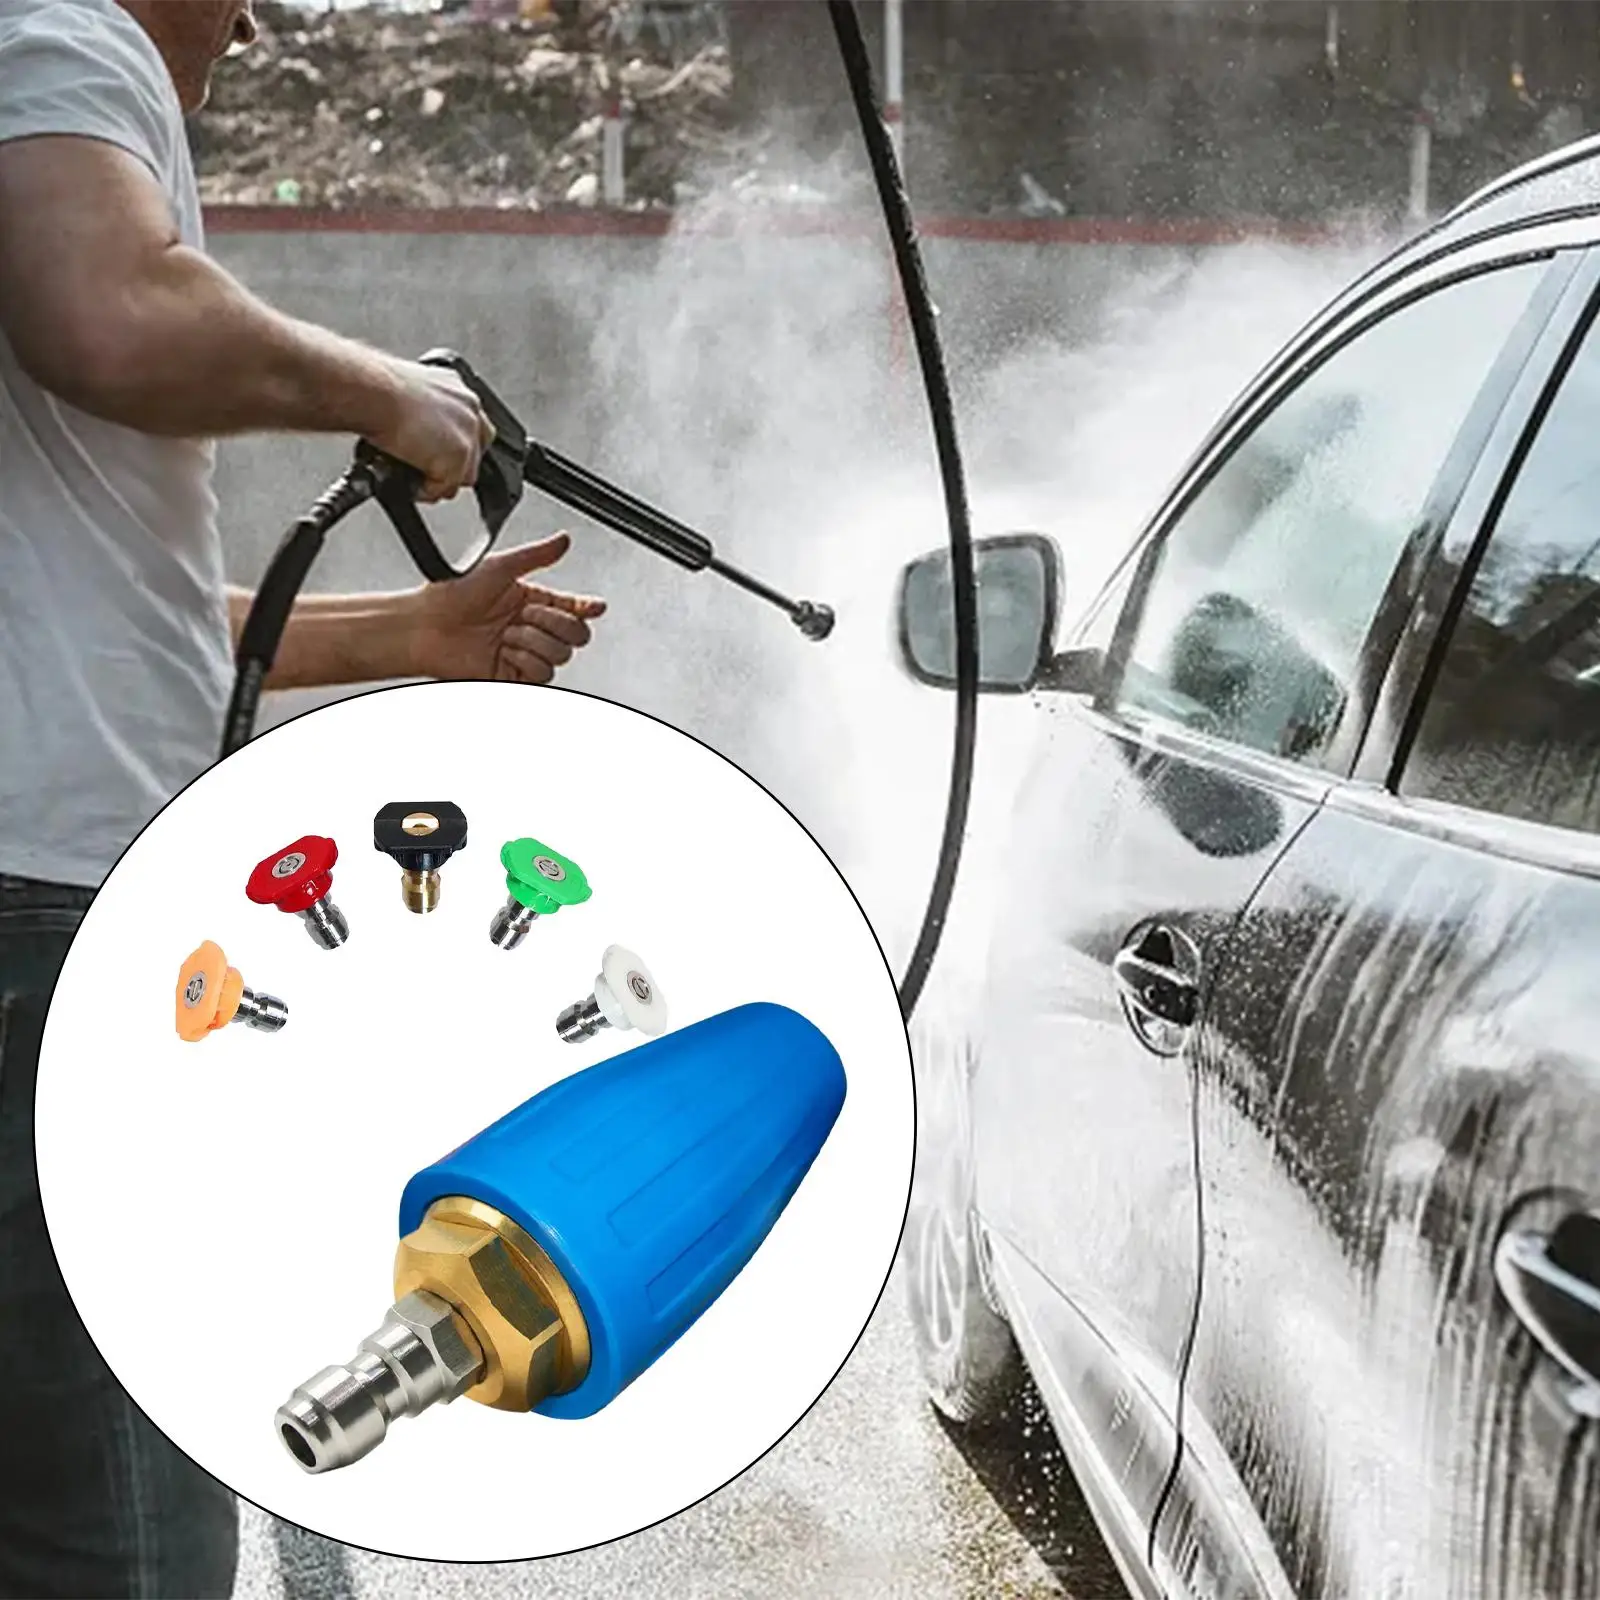 

5000 PSI Pressure Rotating Turbo Nozzle Universal 5 Nozzle Tips for Cleaning Concrete Paving Stones Vinyl Surfaces Car Washing